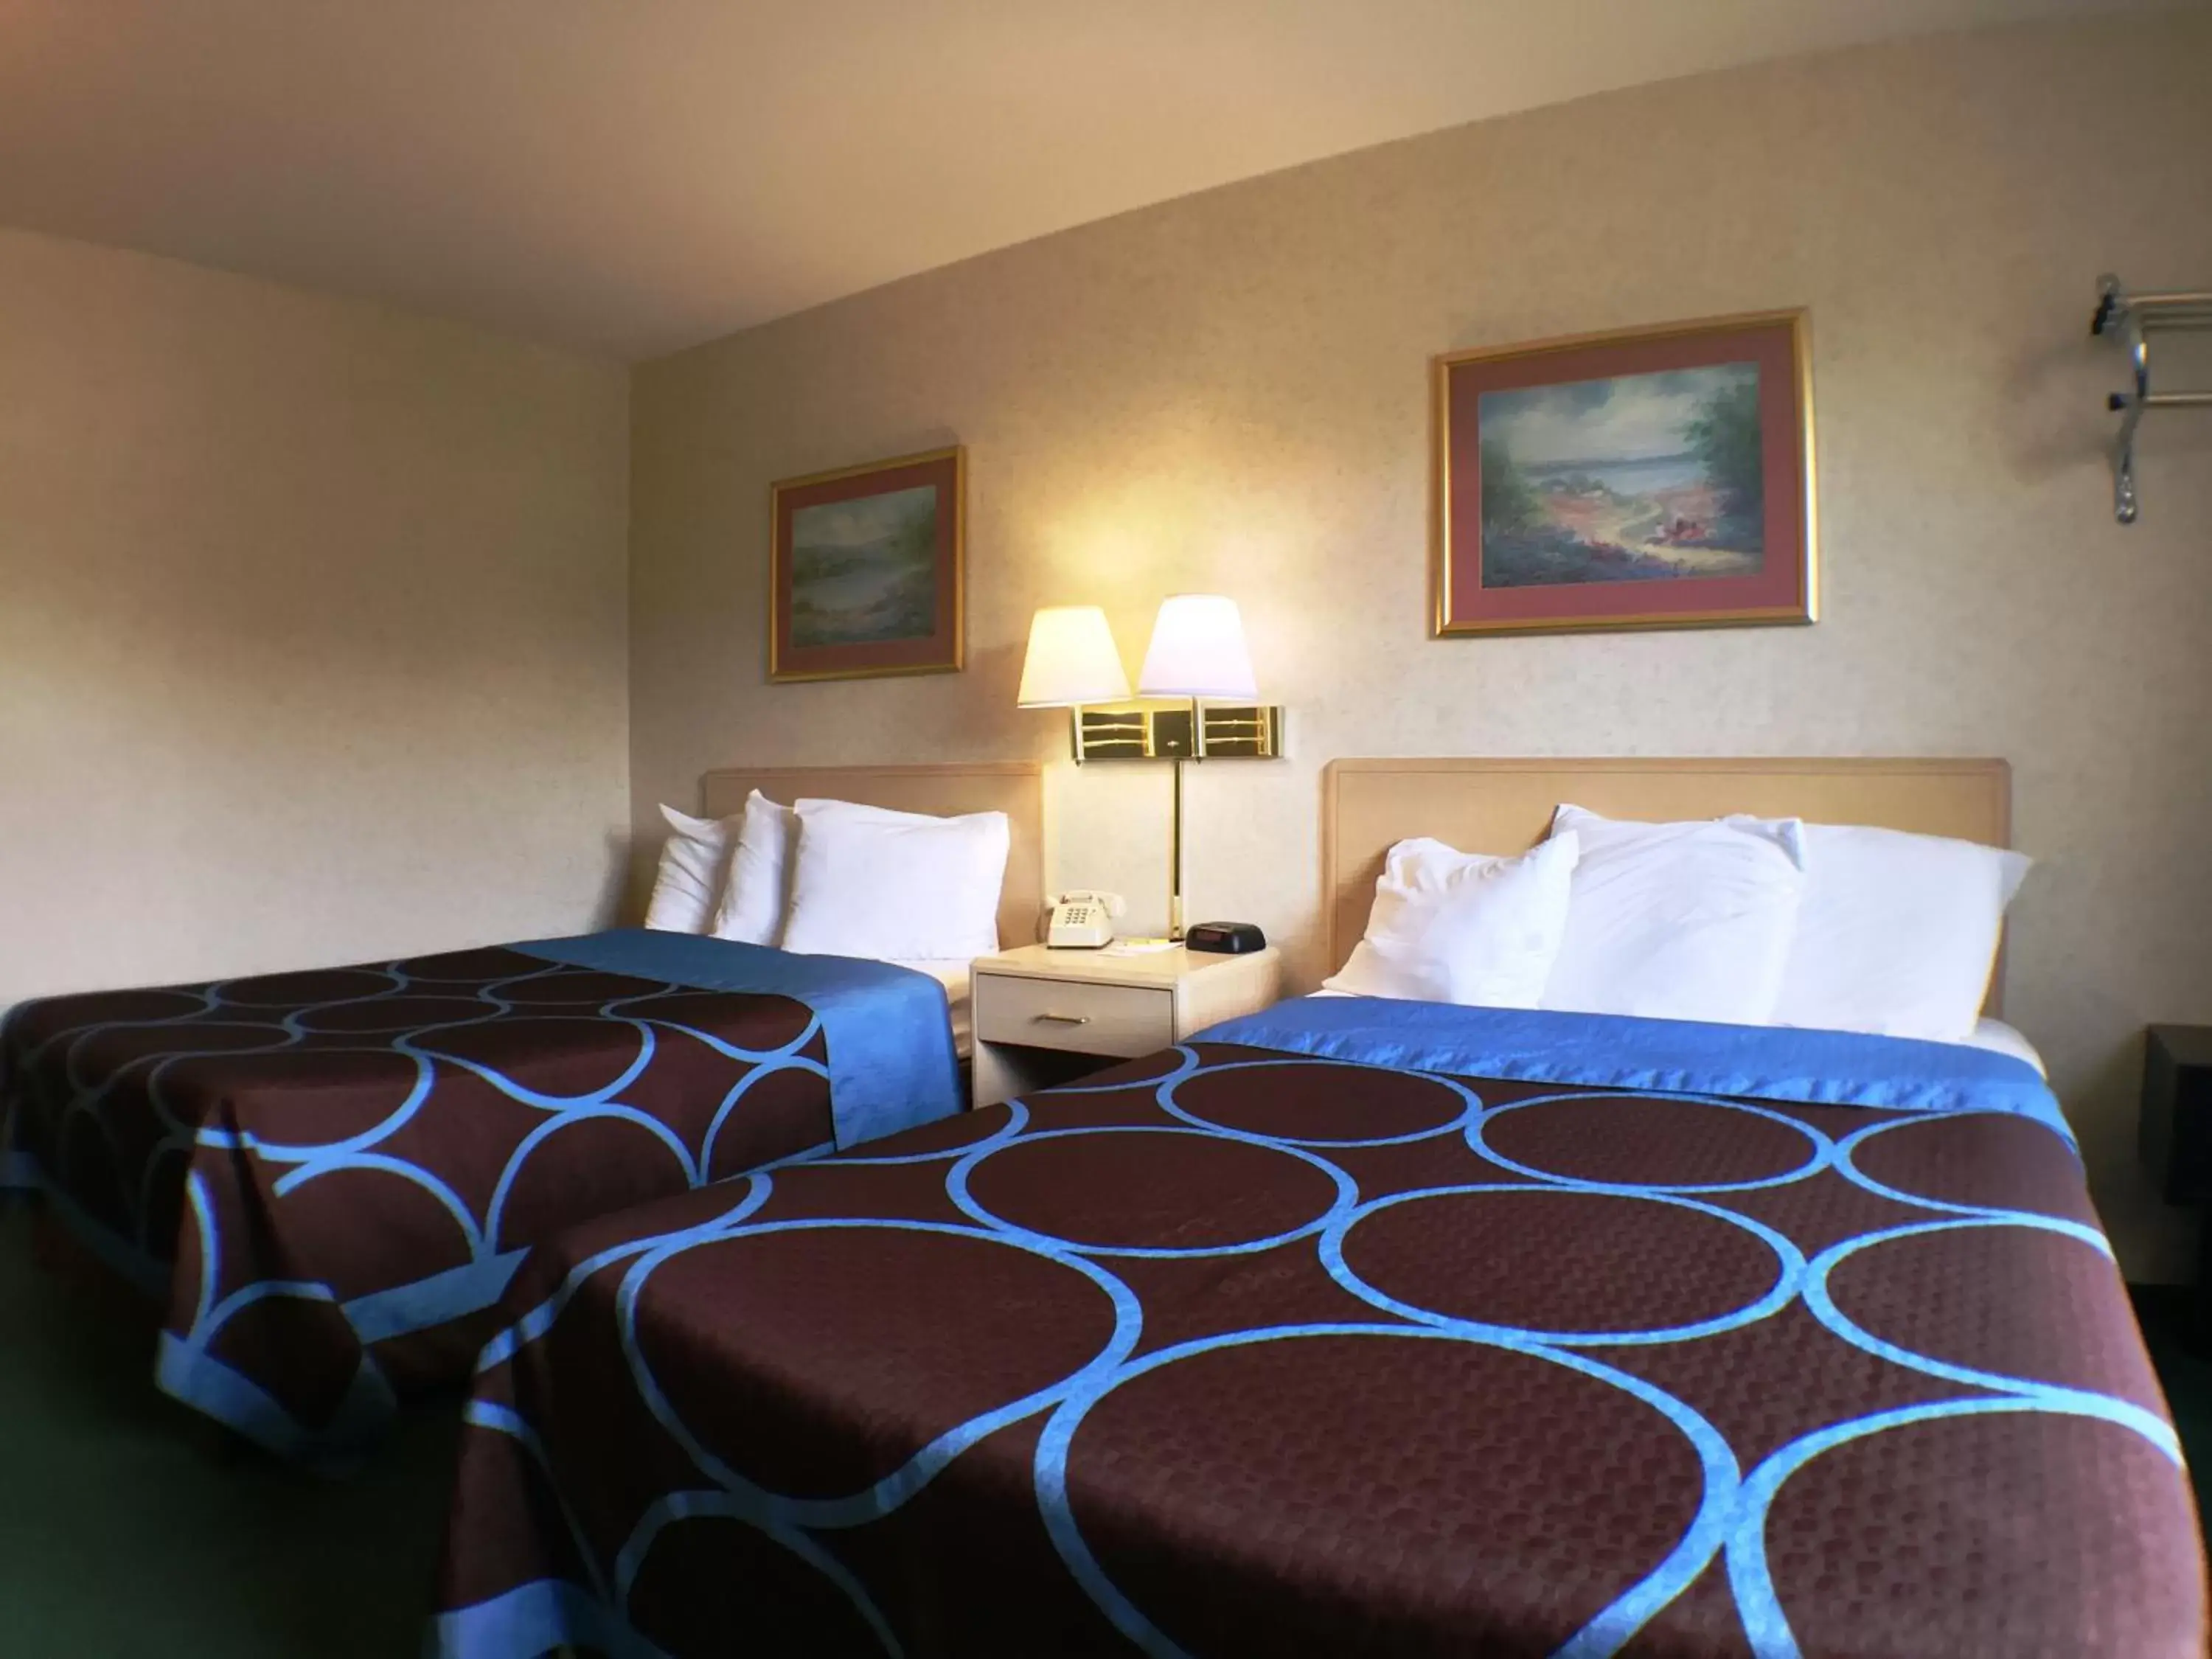 Bed, Room Photo in Super 8 by Wyndham Canandaigua